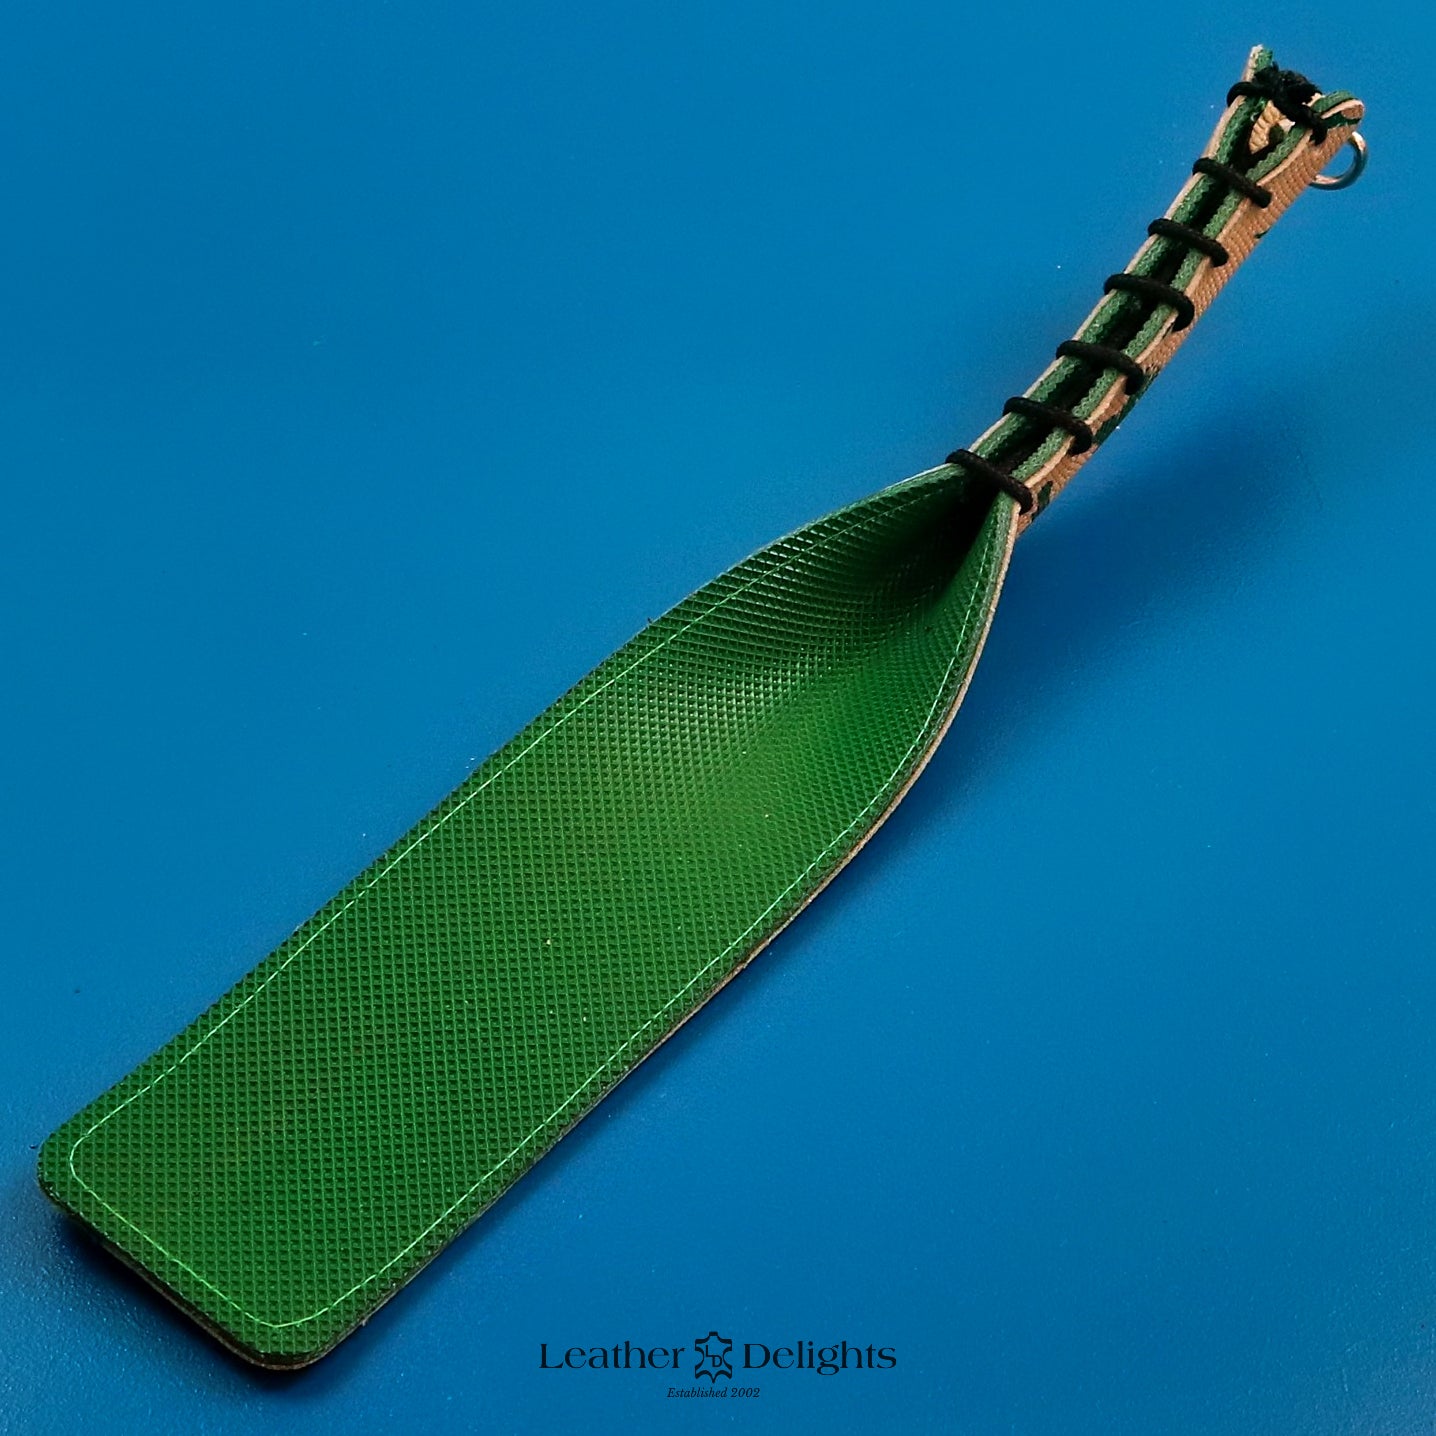 Double Cheek Slapper - Dinosaur Print Leather & Green Inverted Dimple Rubber